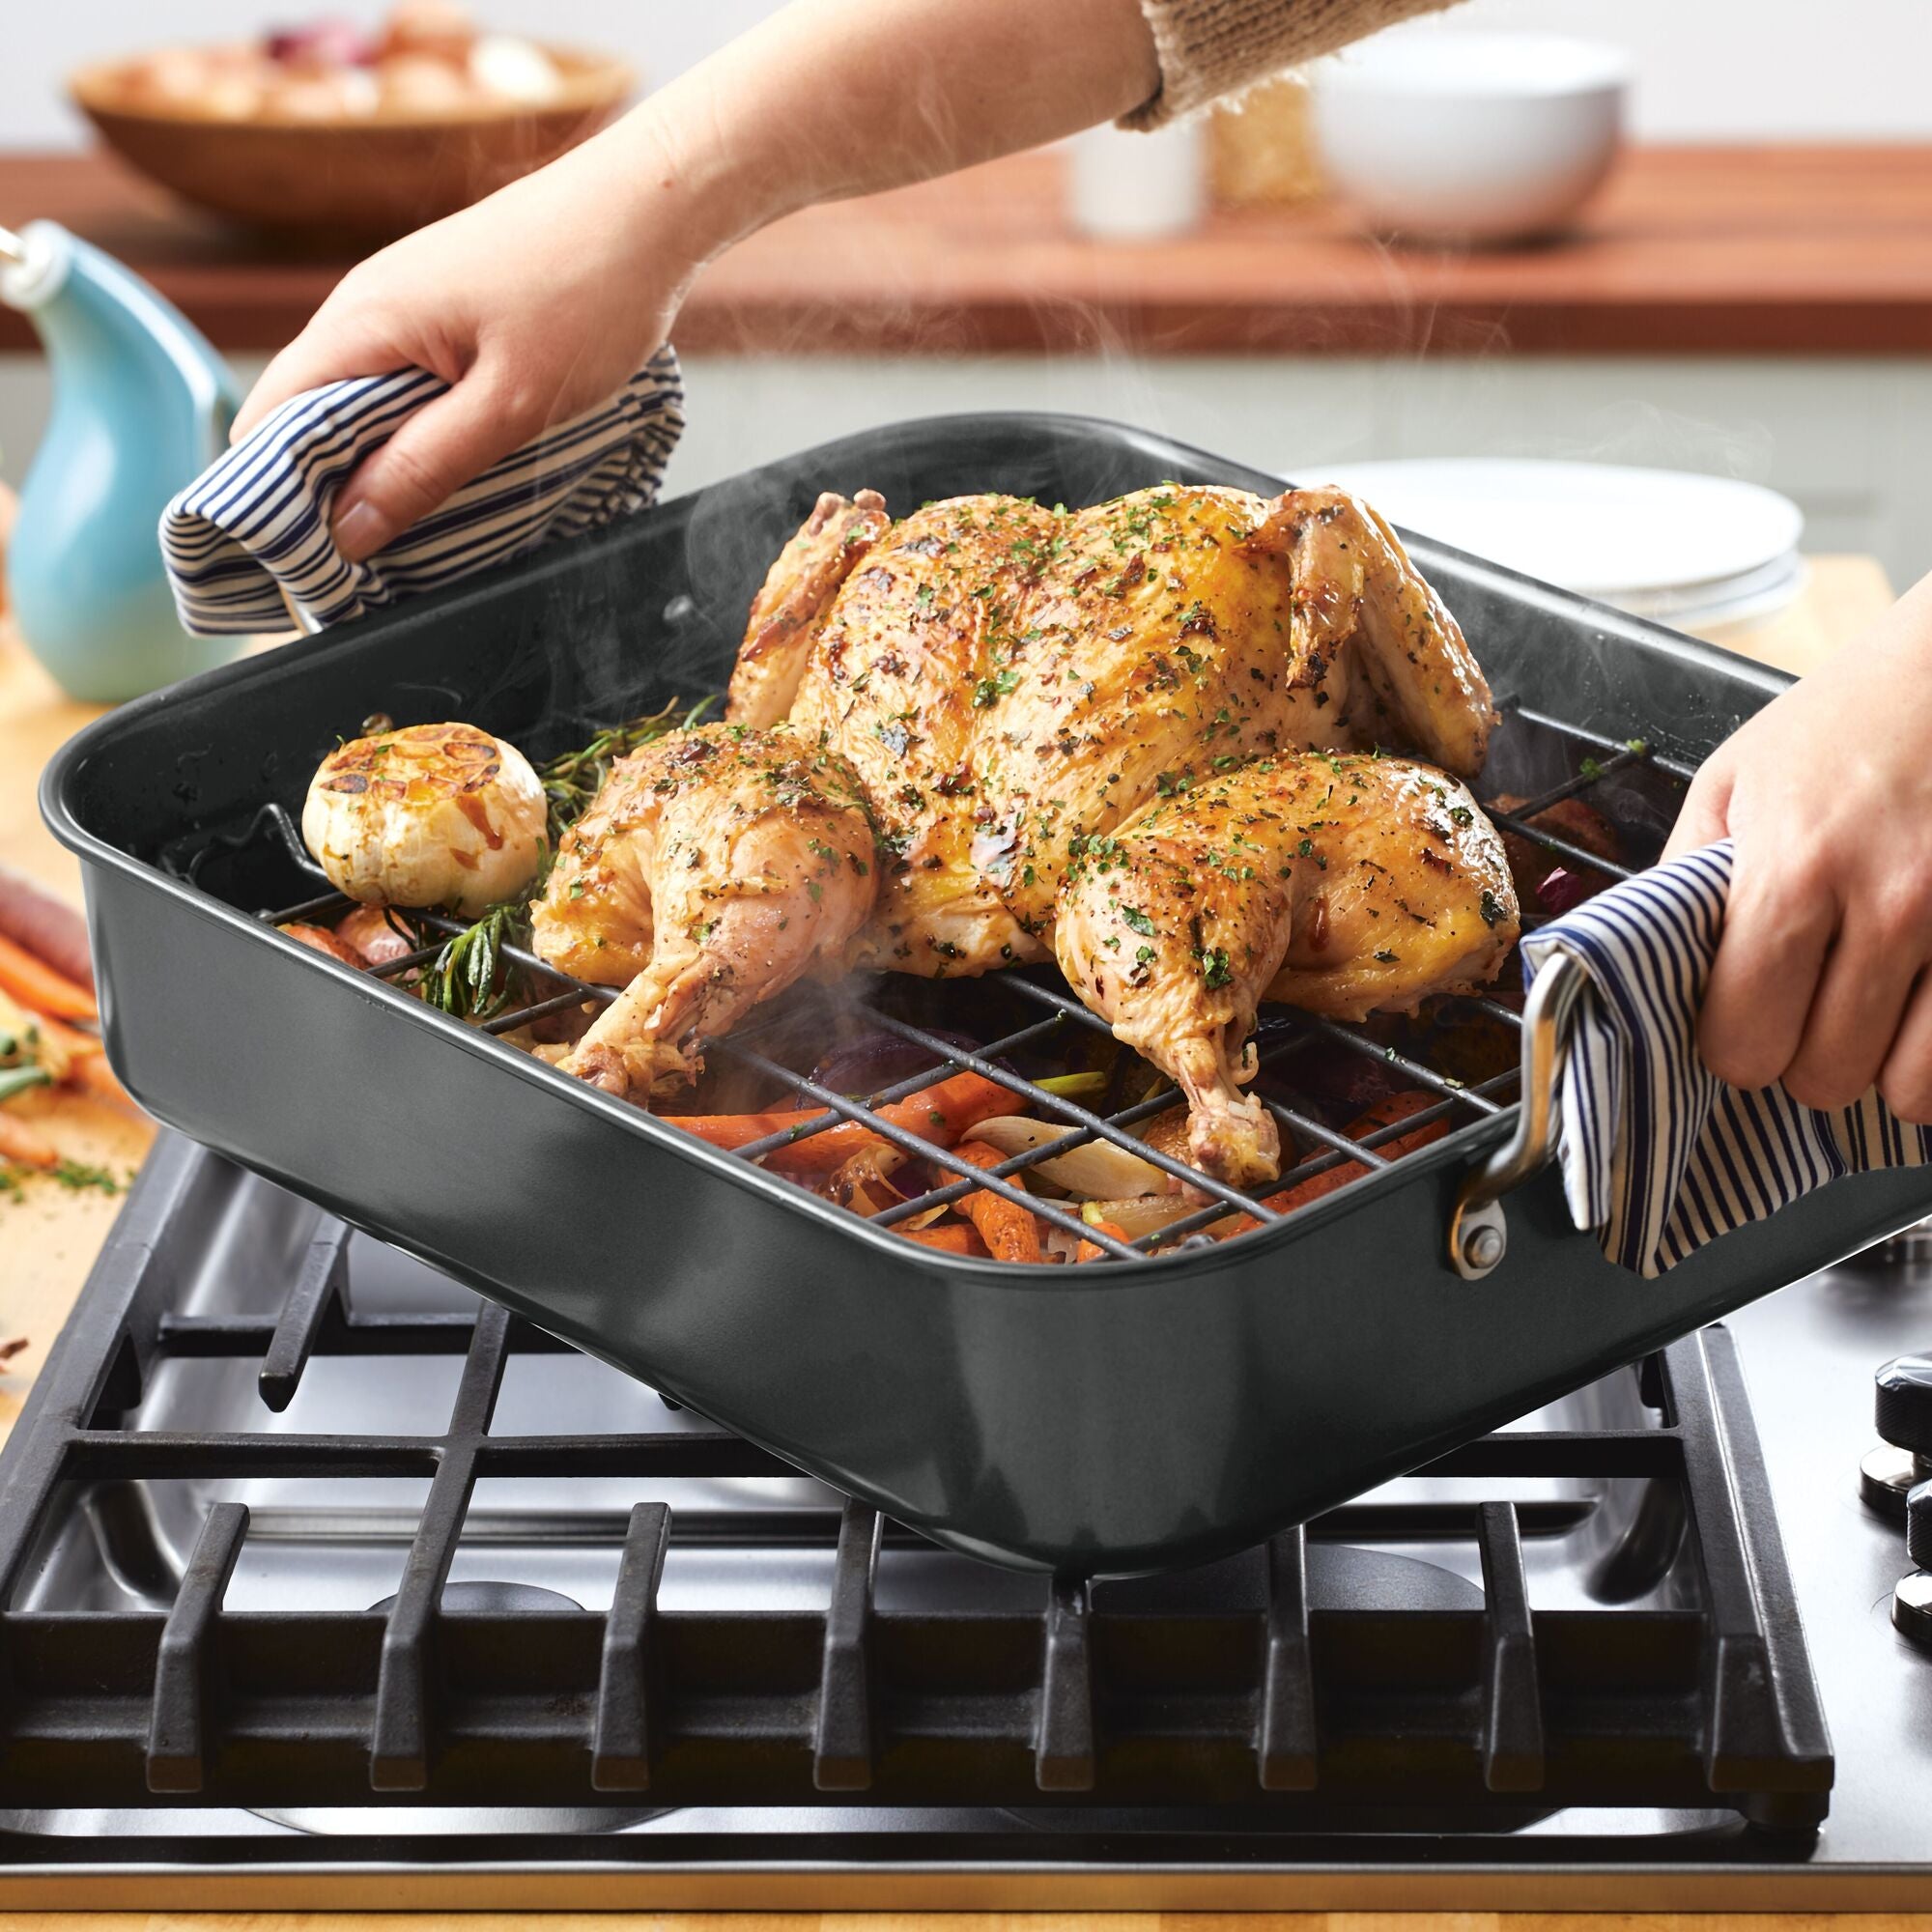 Rachael Ray Bakeware Nonstick Roaster/Roasting Pan with Reversible Rack,  16.5 Inch x 13.5 Inch, Gray